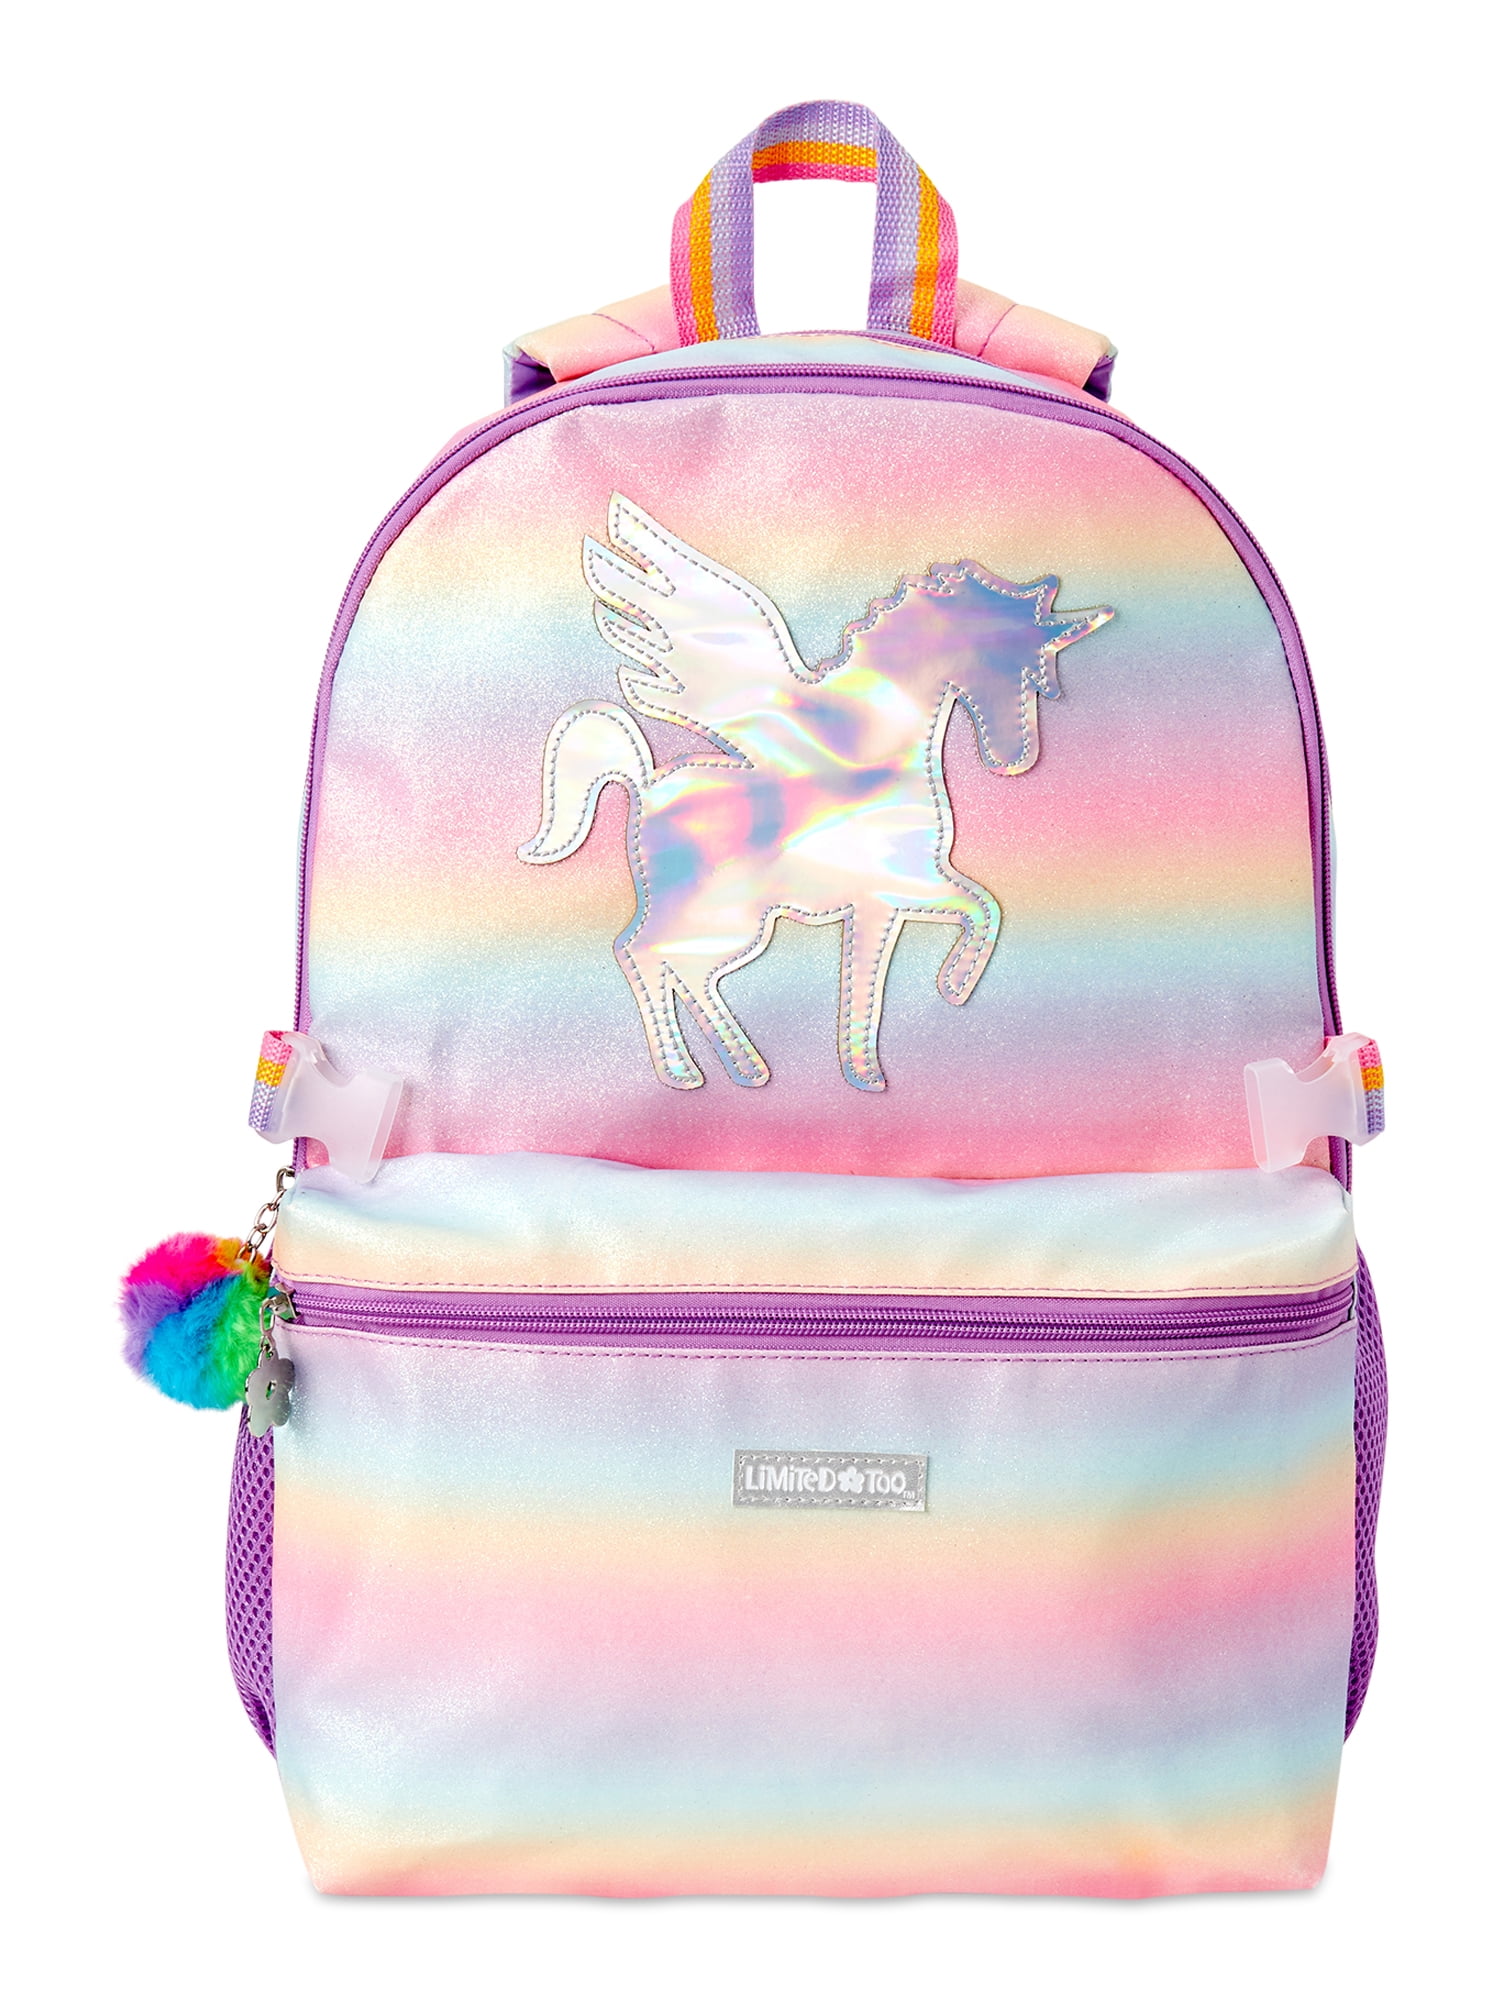 Limited Too Sugar Glitter Backpack with Lunch Bag, Rainbow Unicorn ...